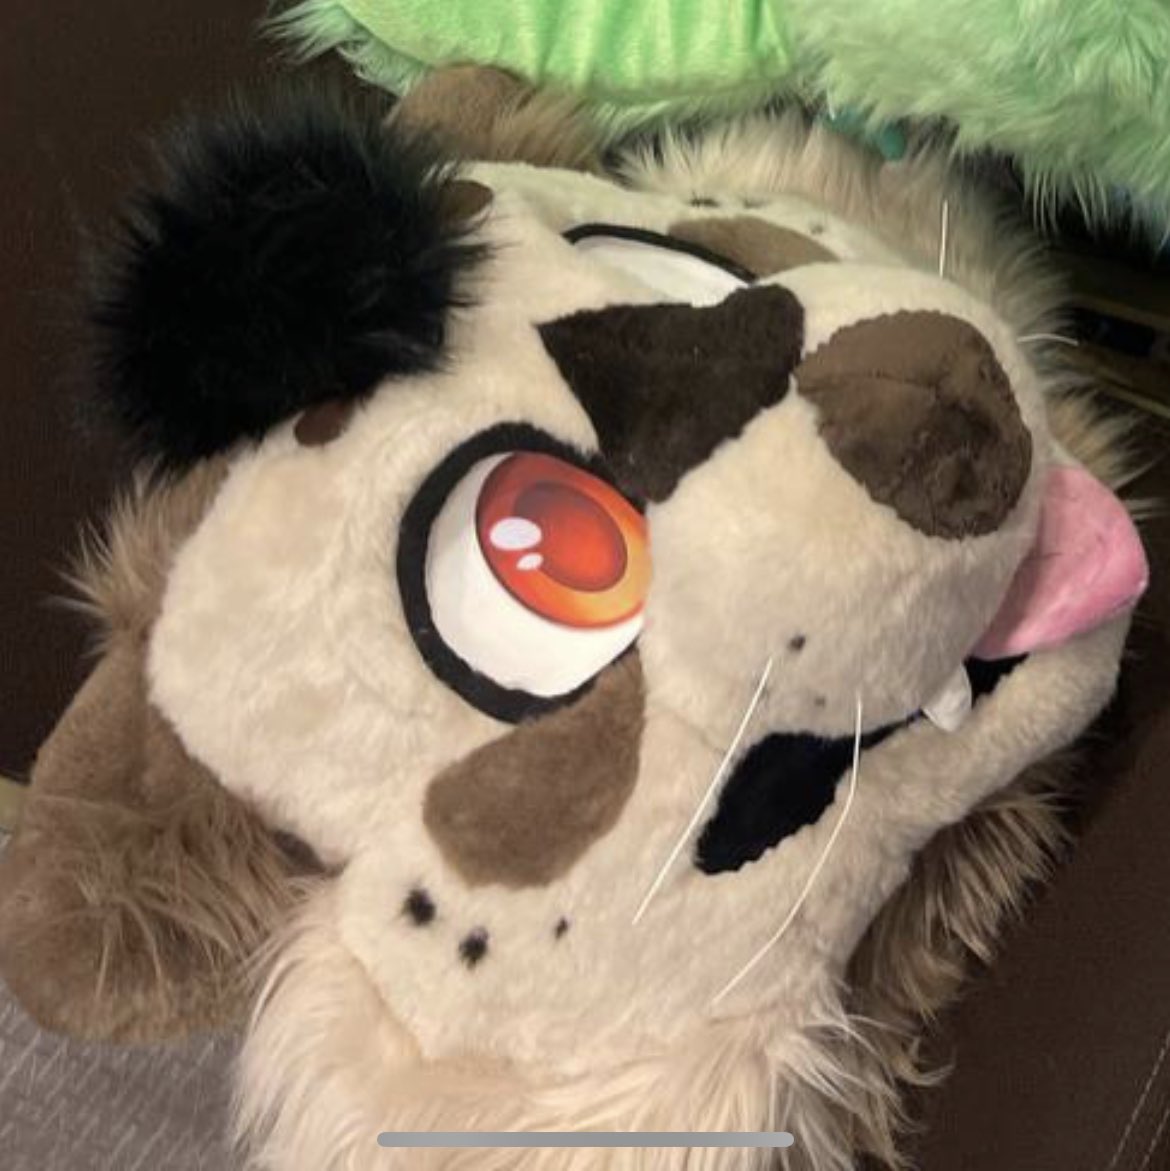 Otto was stole at #goldenstatefurcon #gsfc if anyone sees him please let me know